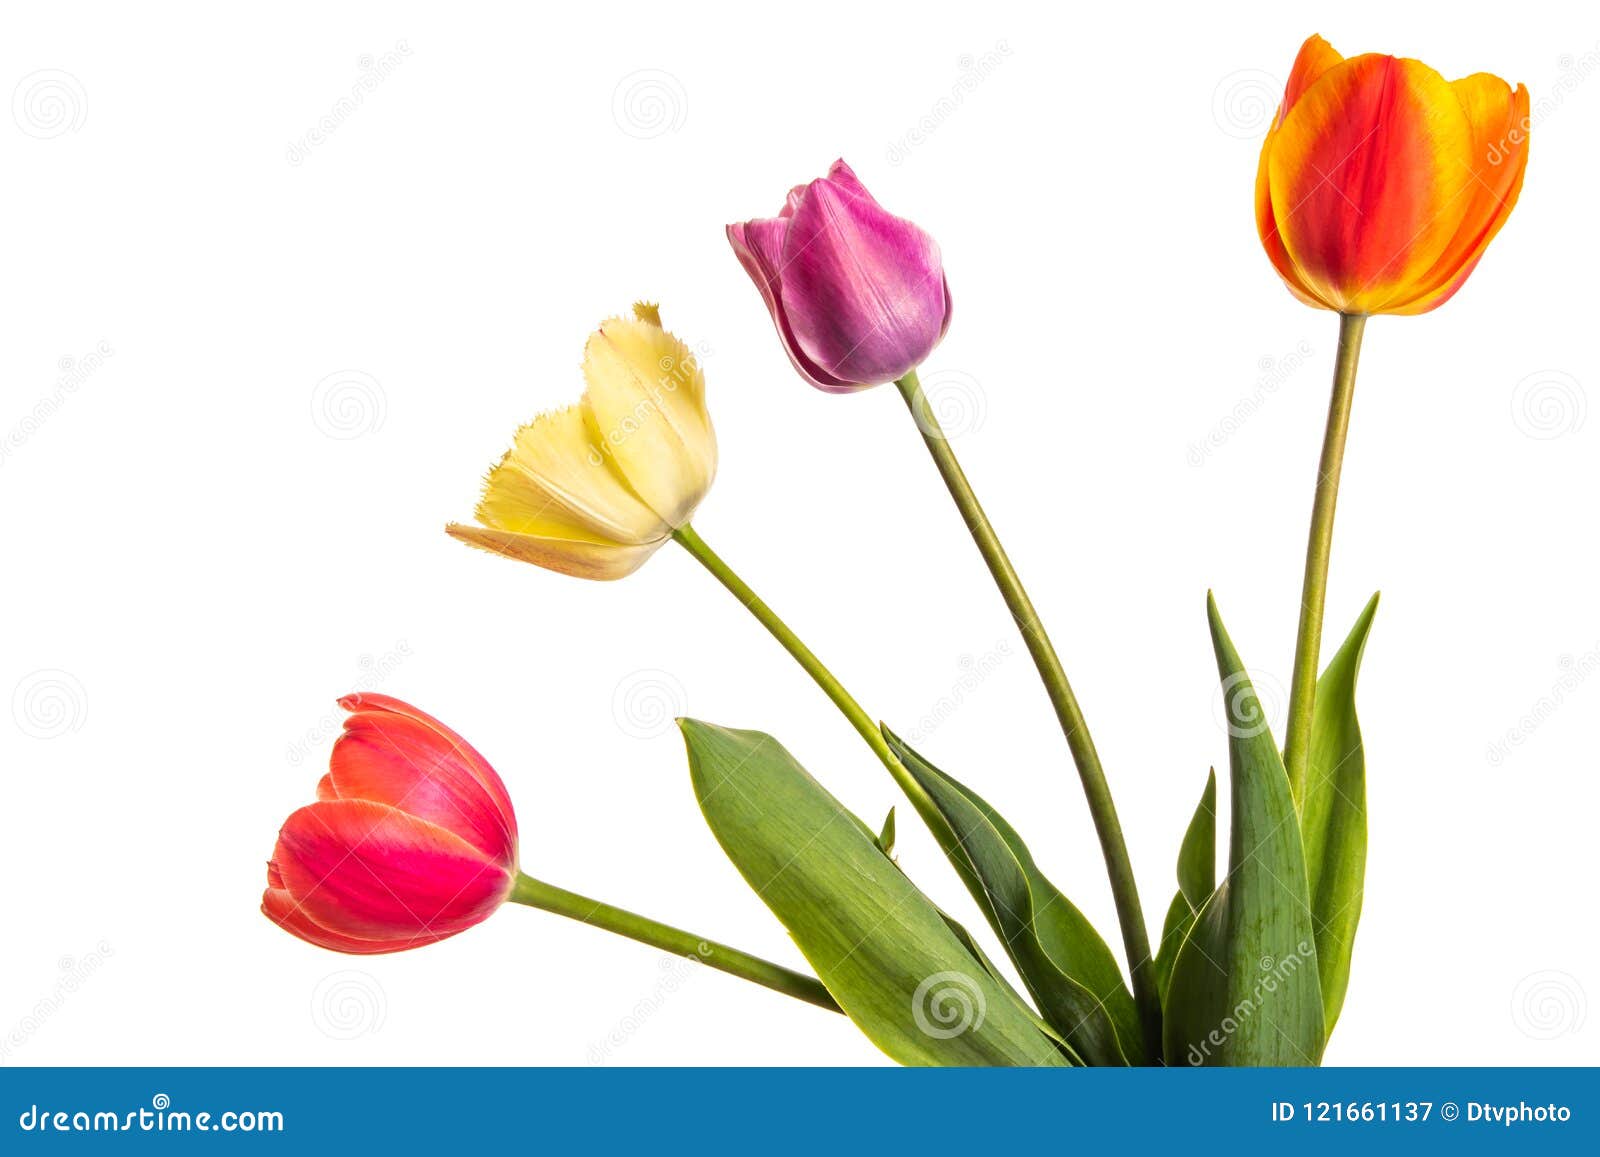 Multicolored Tulip Flowers Isolated on White Stock Image - Image of ...